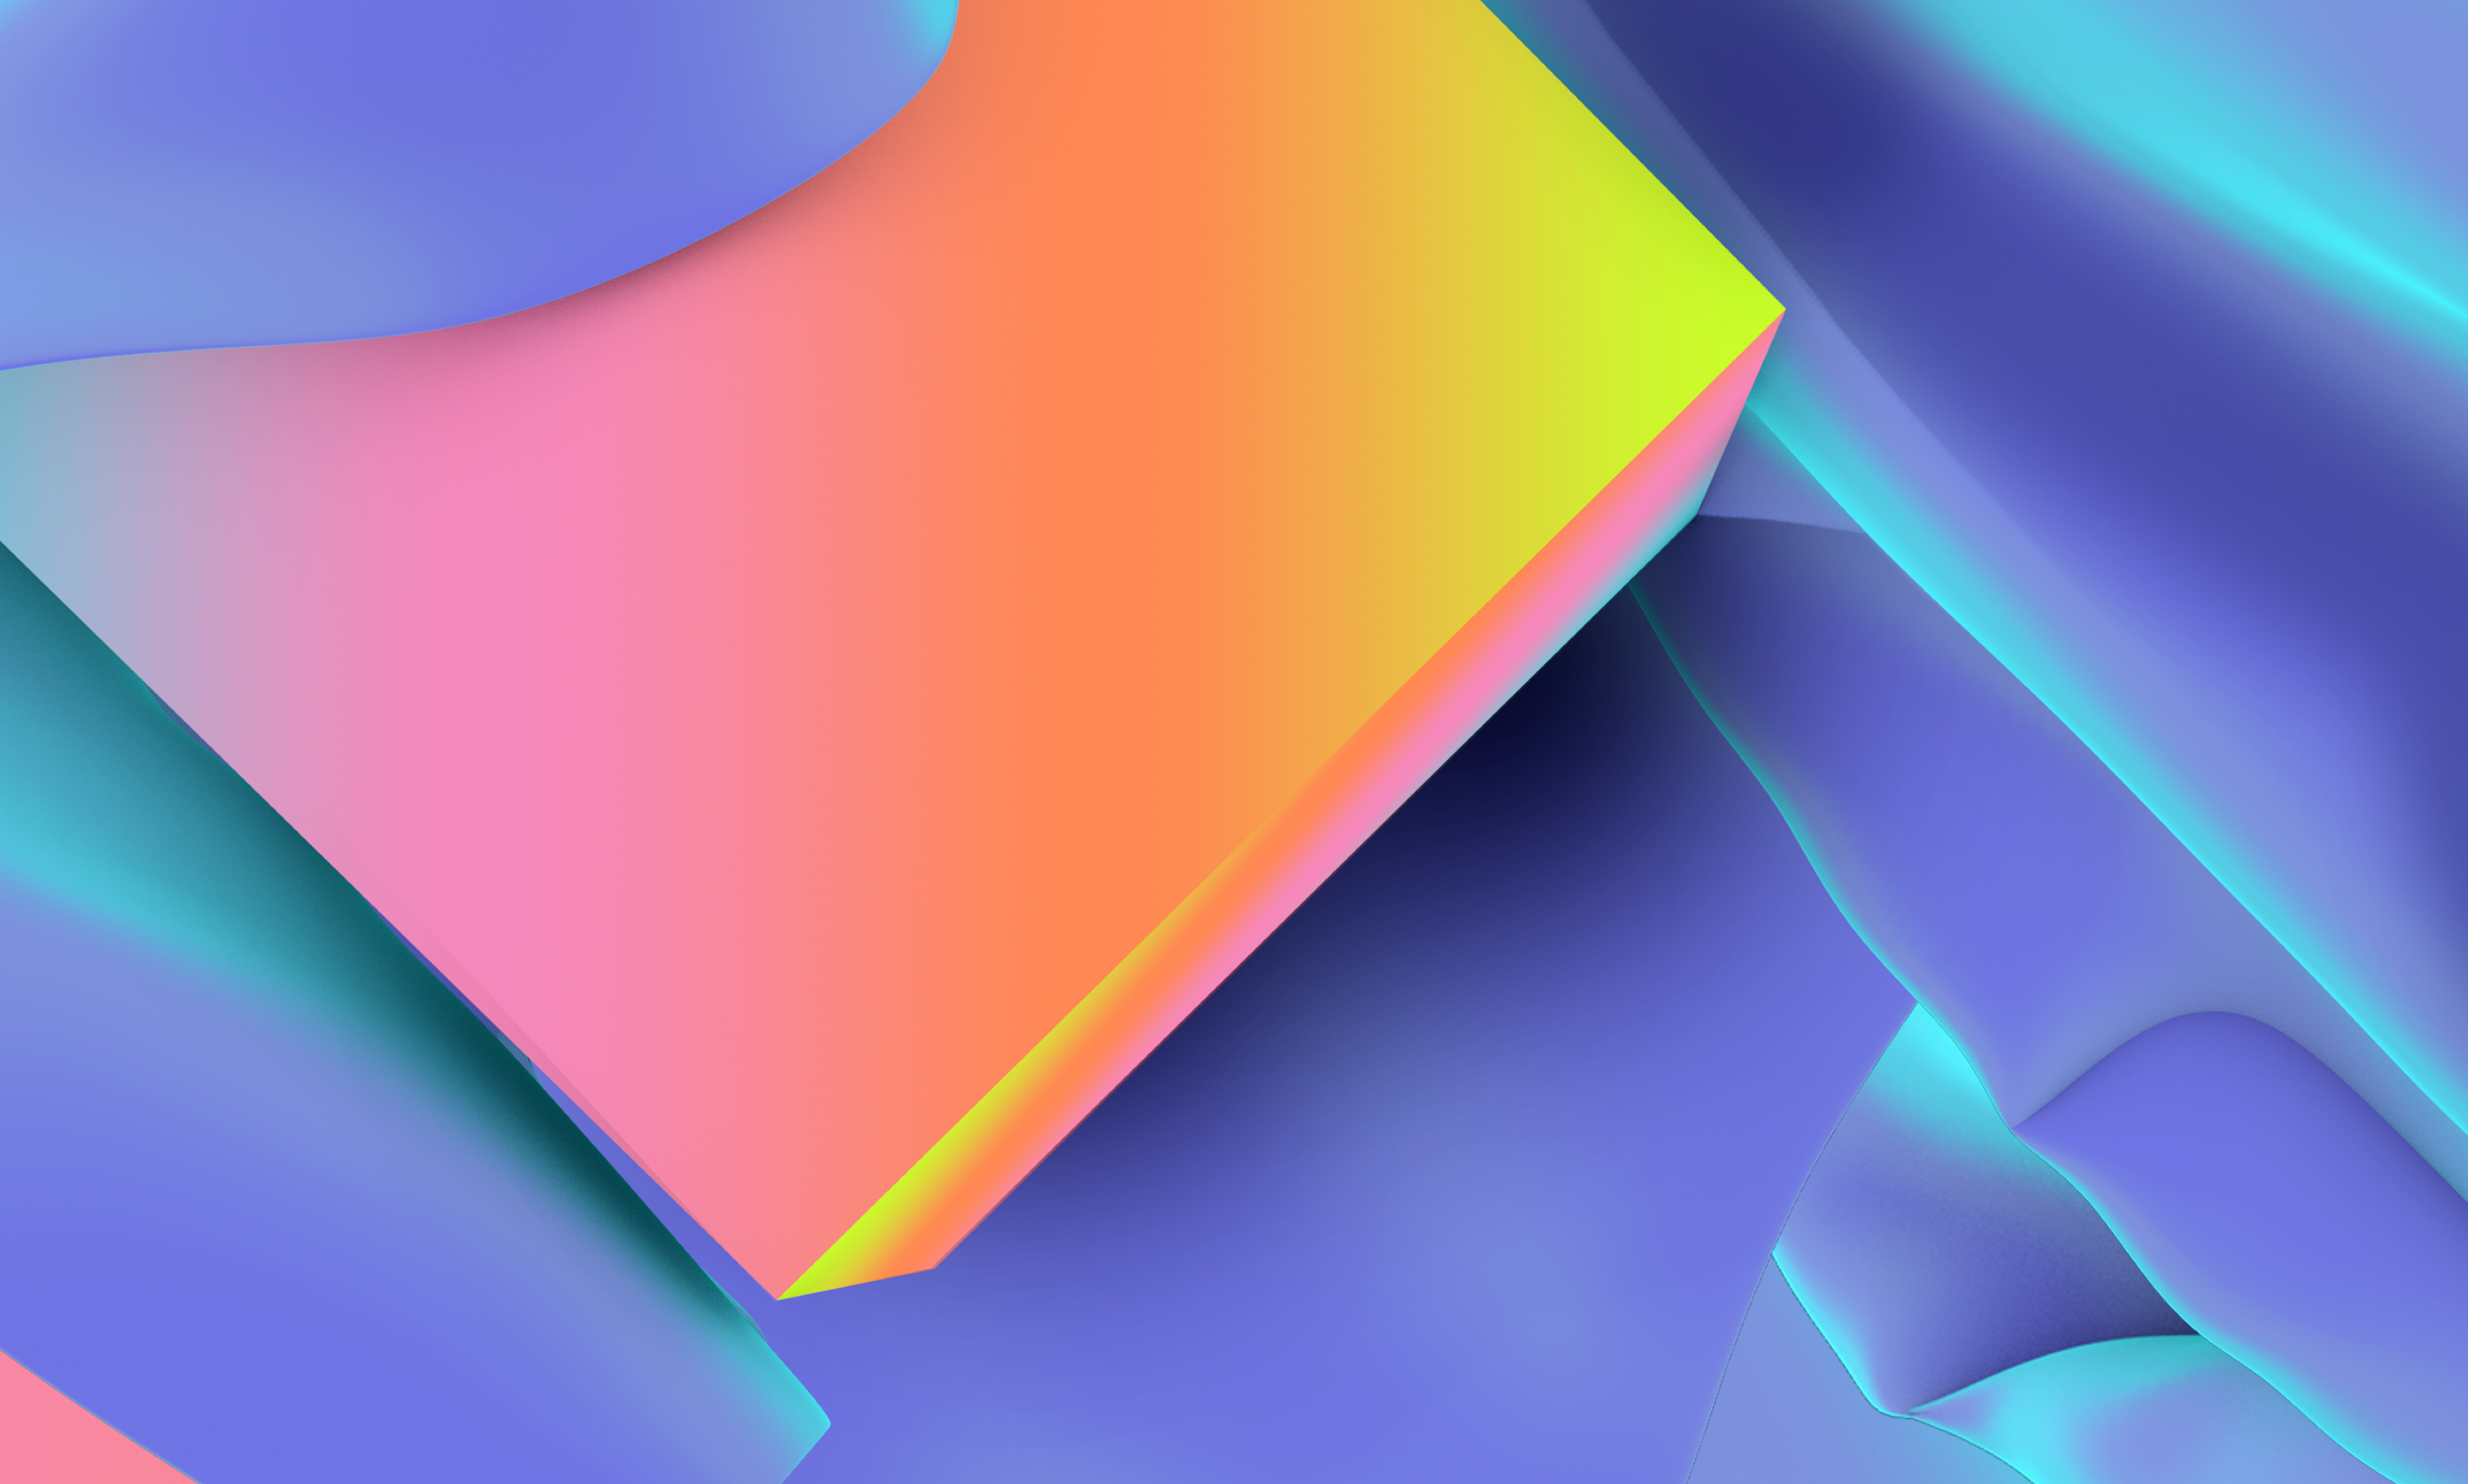 a neon orange prism surrounded by shades of blue